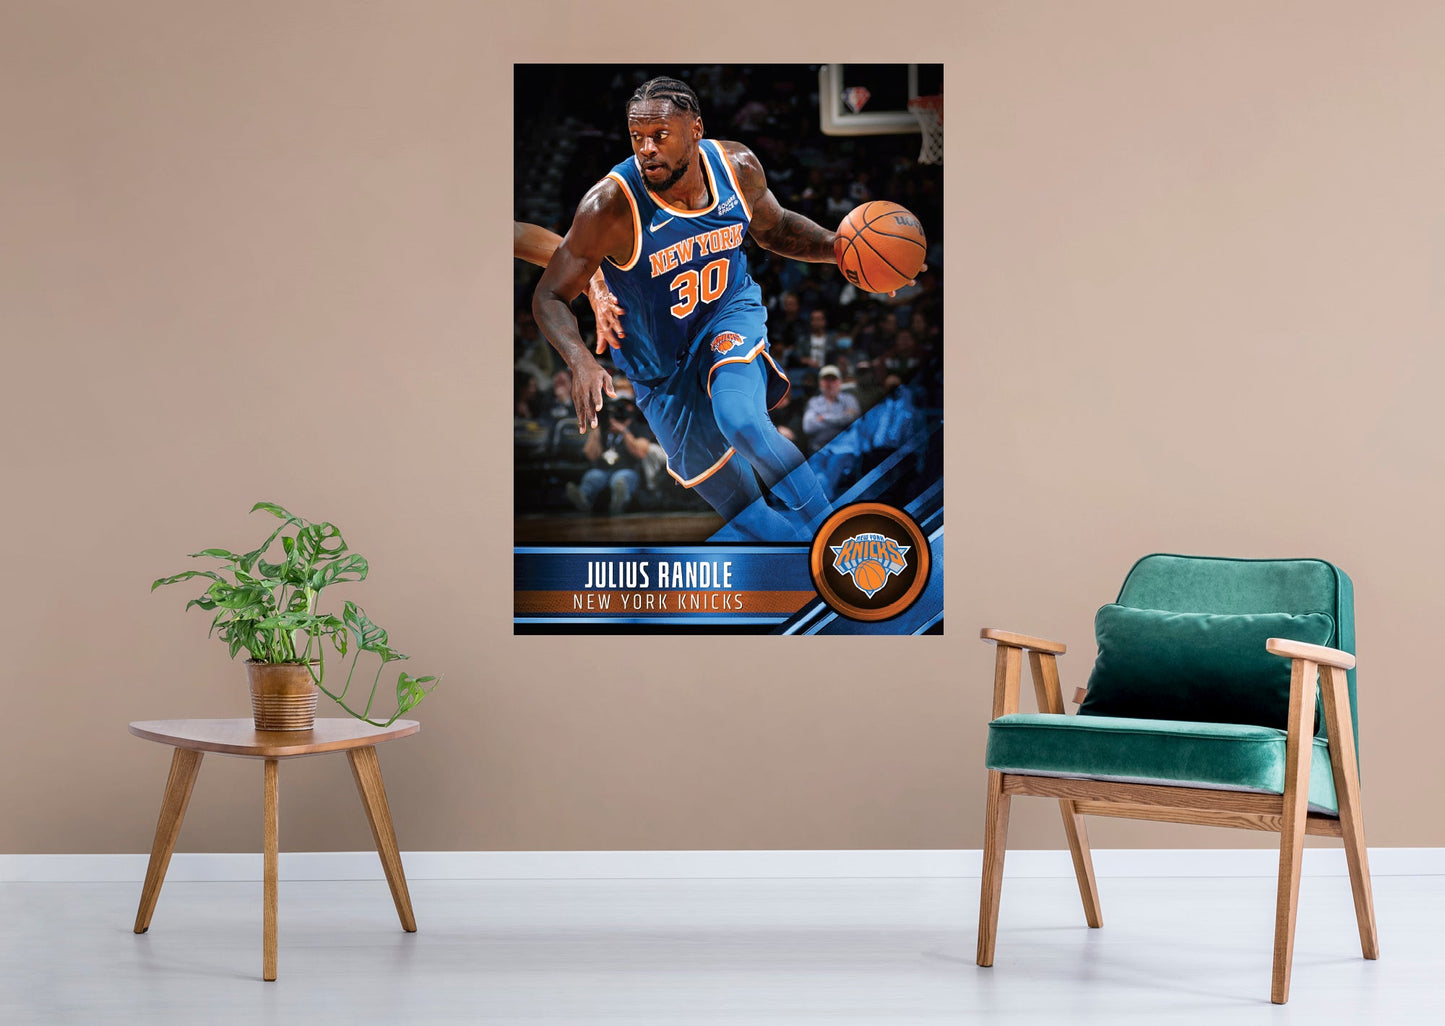 New York Knicks: Julius Randle Poster - Officially Licensed NBA Removable Adhesive Decal